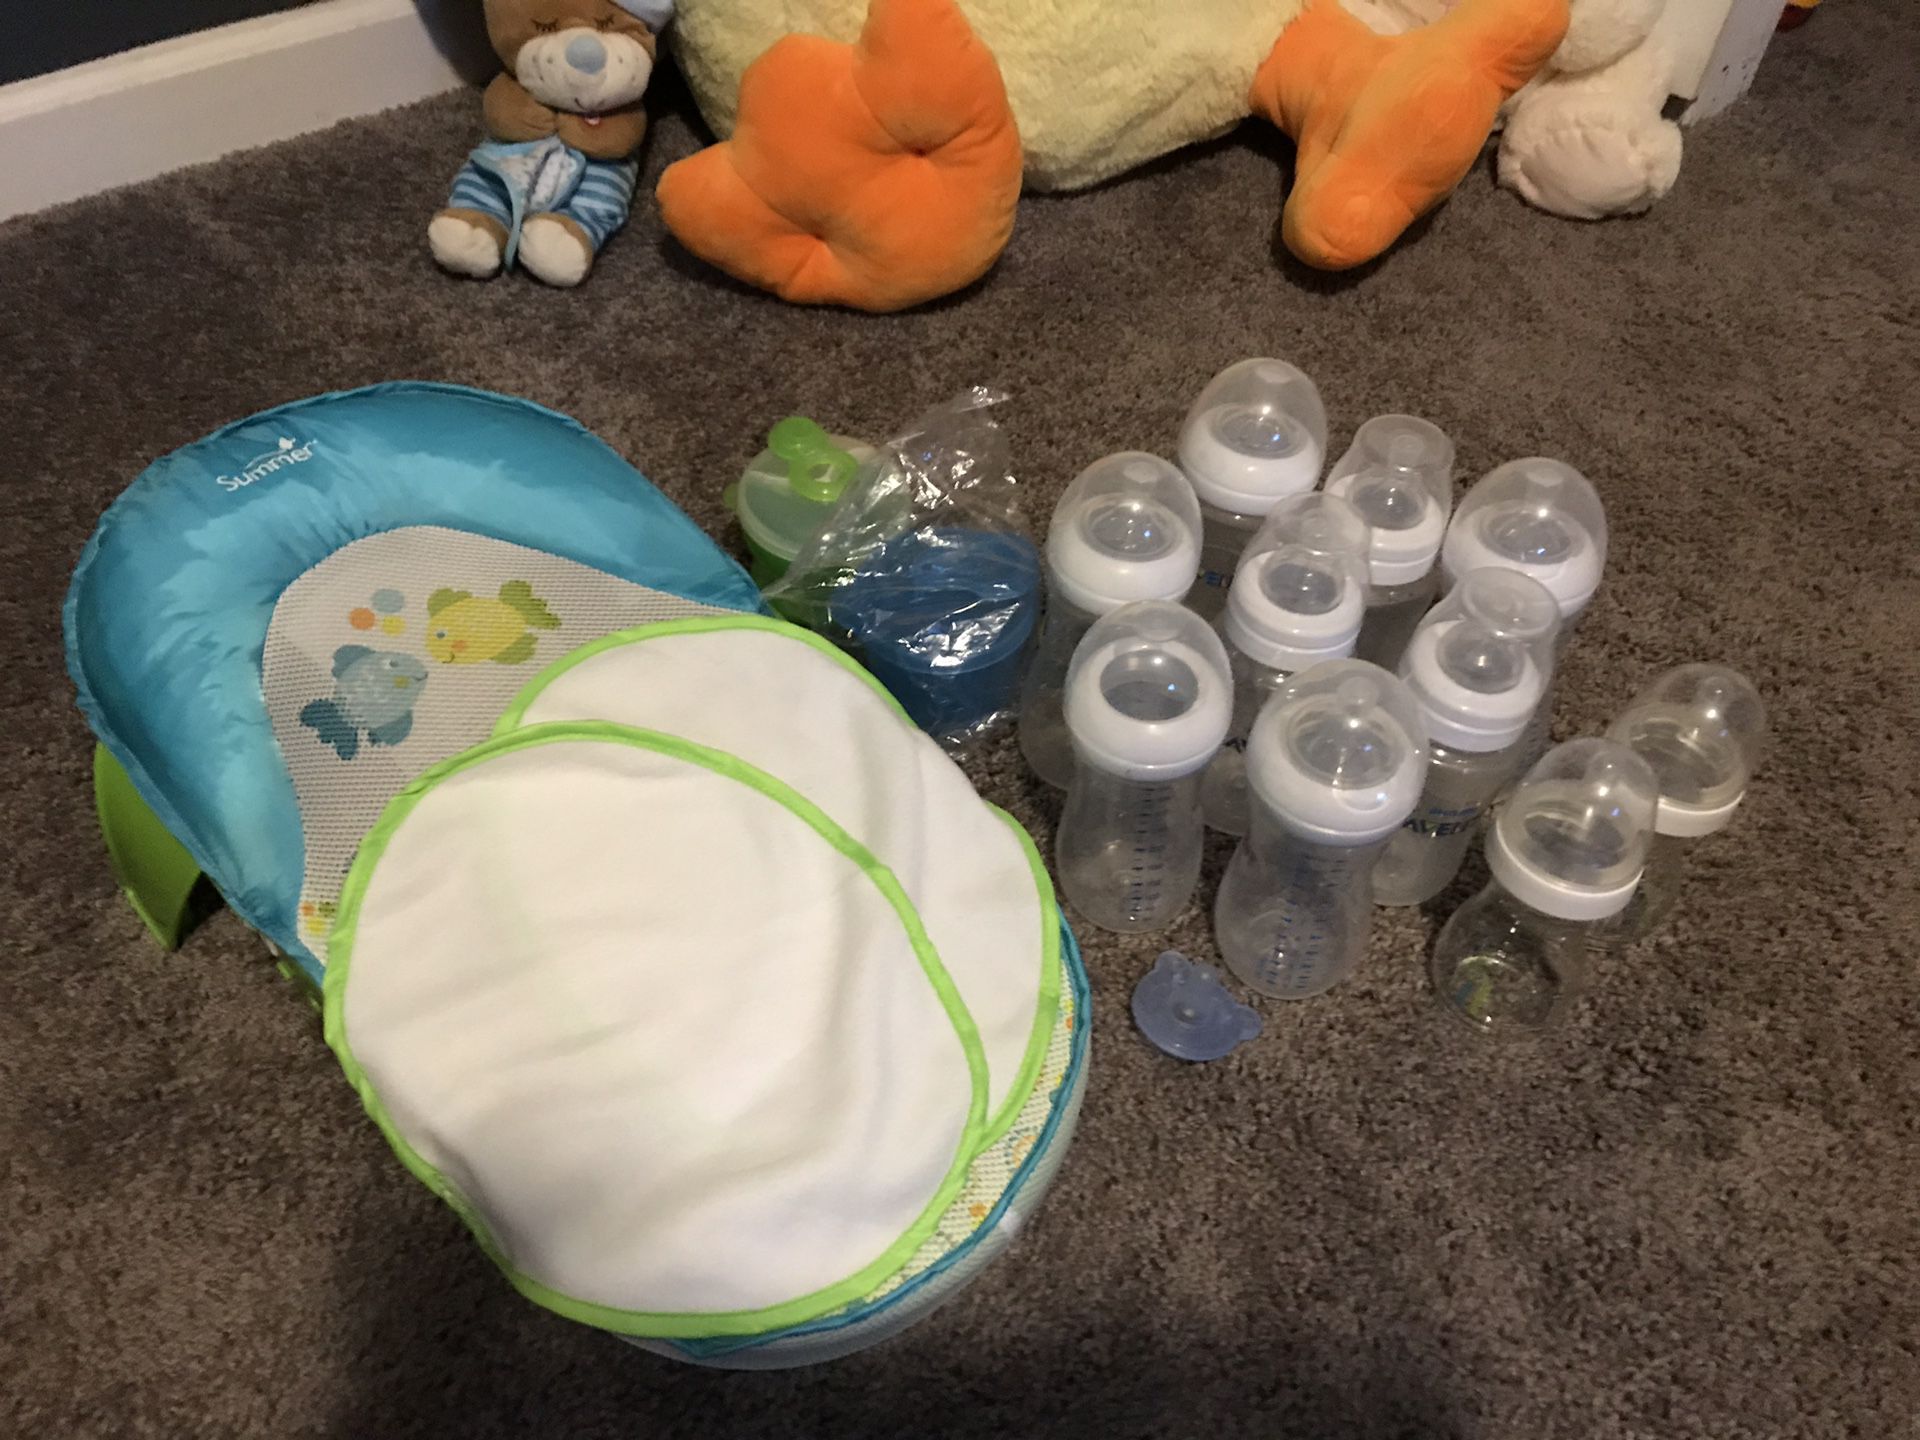 Avent bottles, swaddles, outfits, sleepers